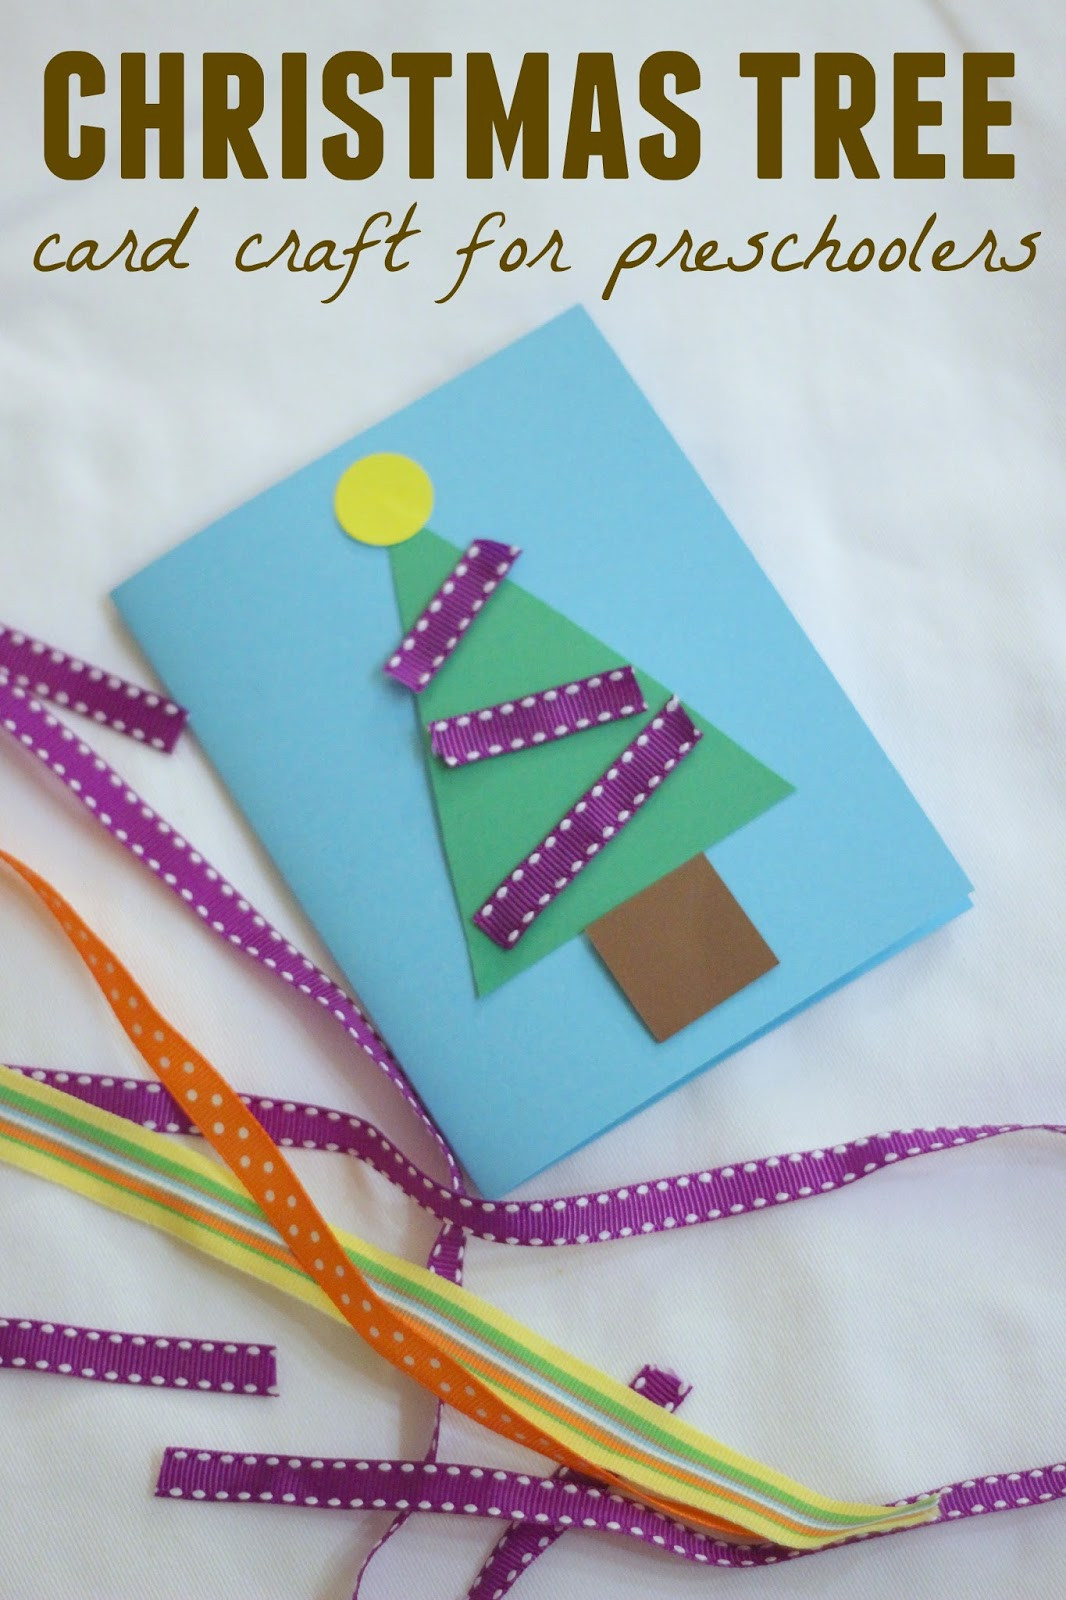 A Crafts For Preschoolers
 Toddler Approved Christmas Tree Card Craft for Preschoolers